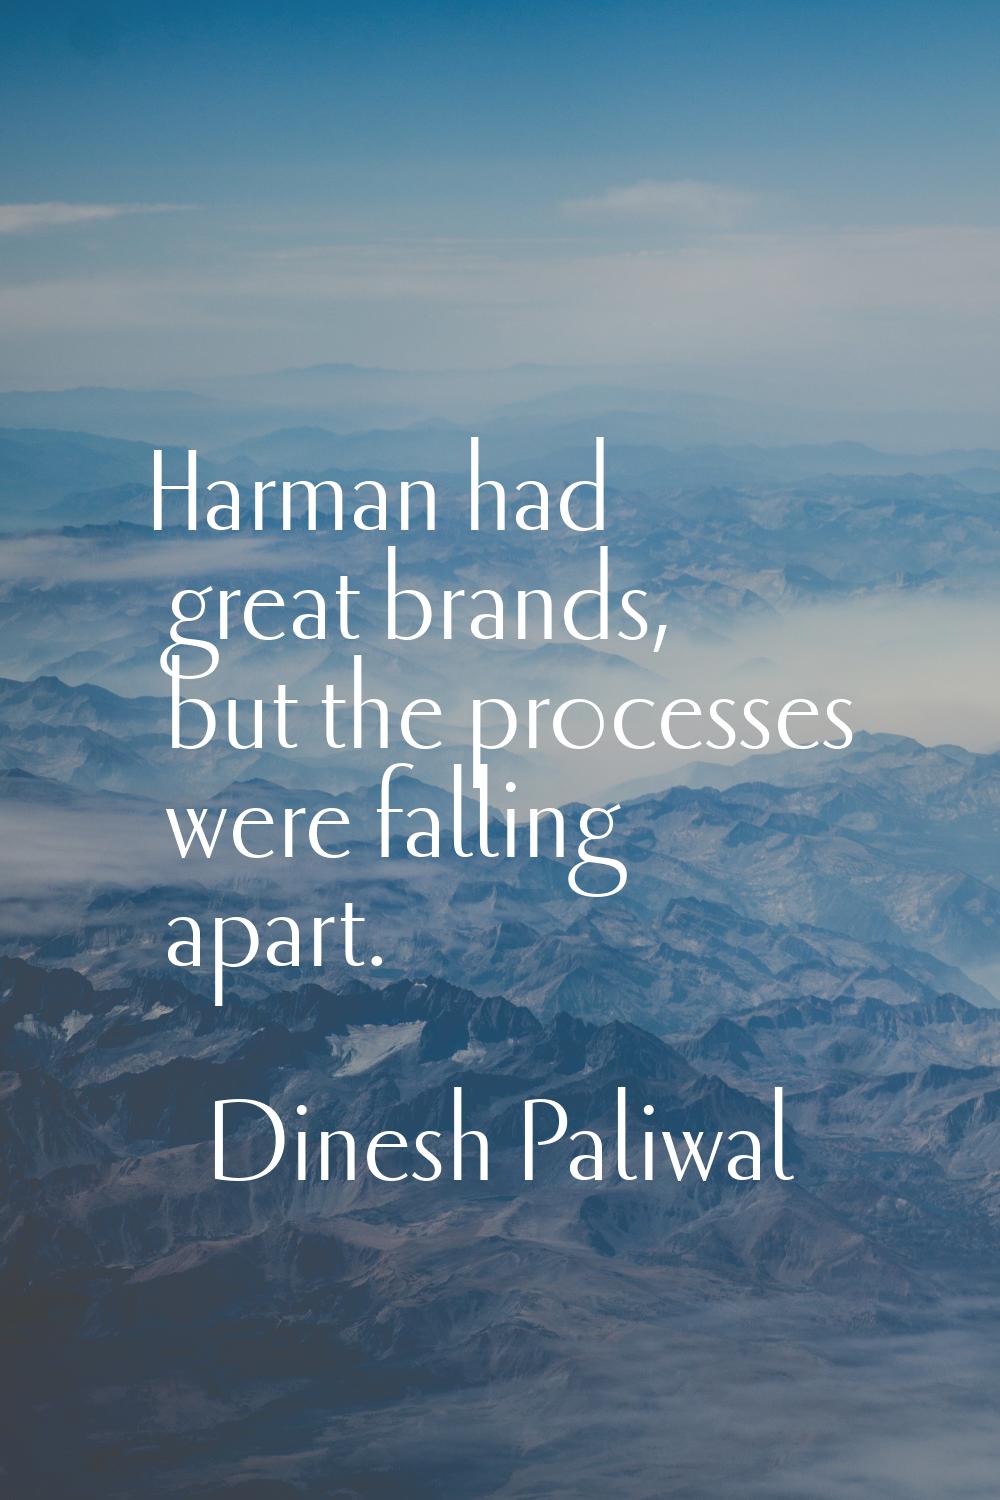 Harman had great brands, but the processes were falling apart.